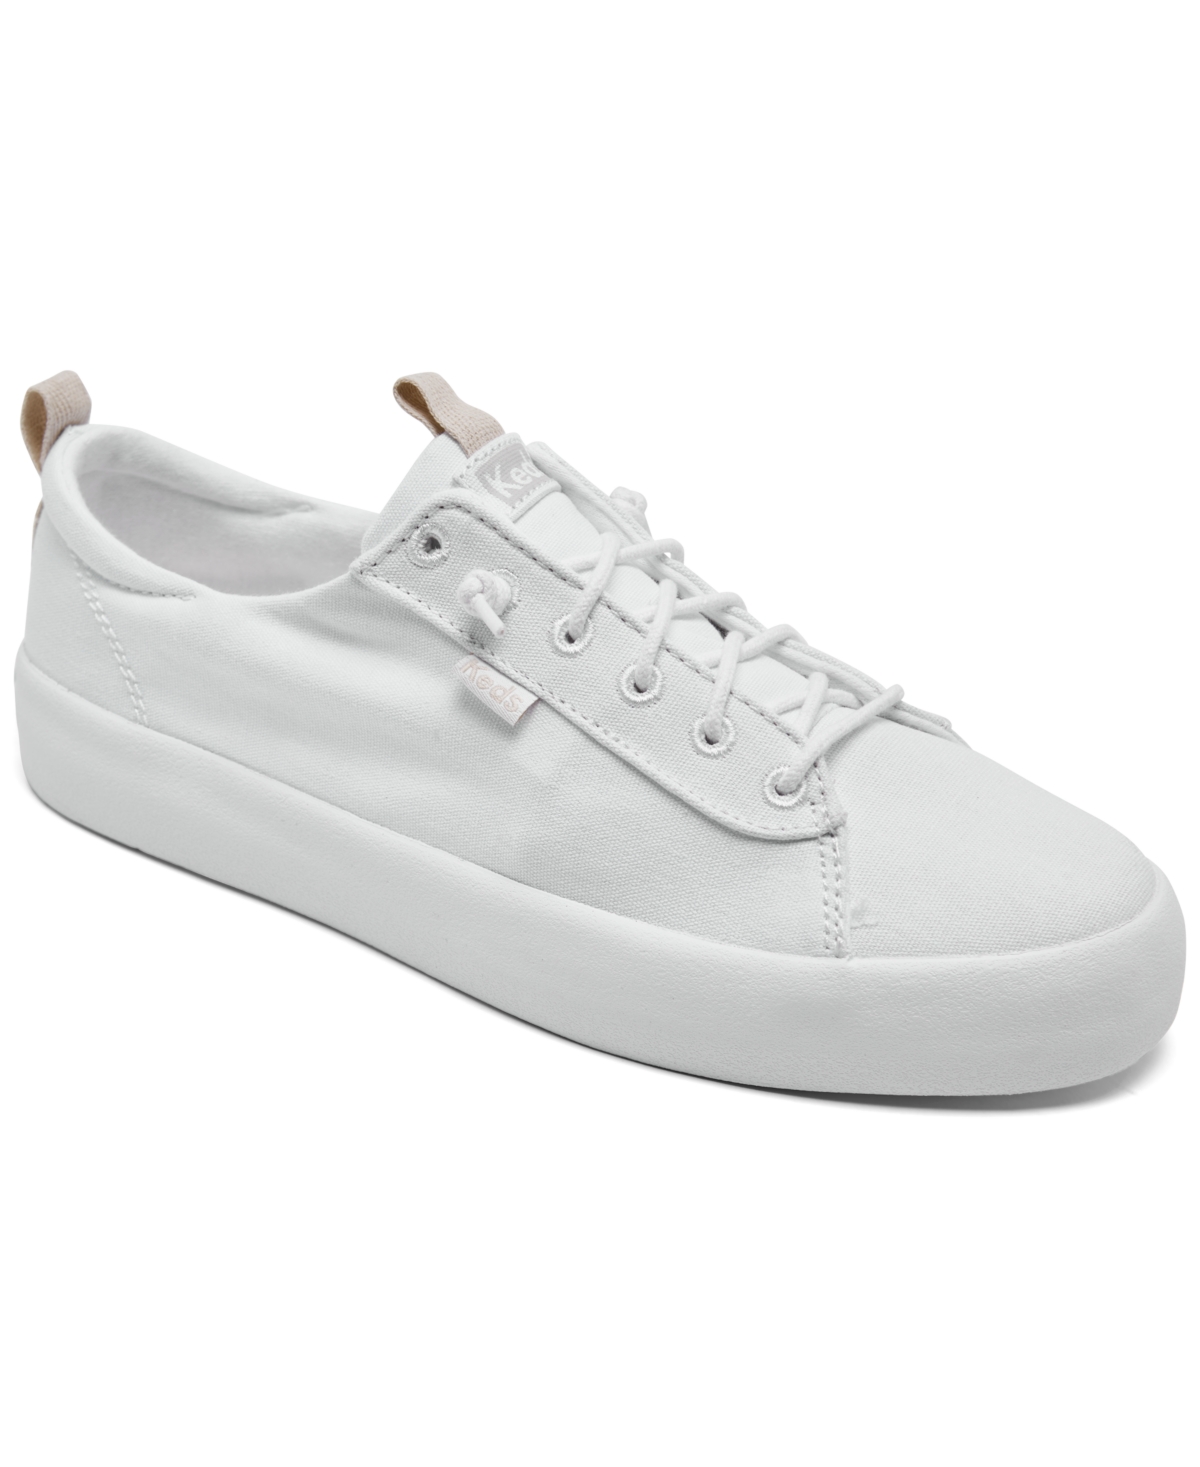 Keds Women's Kickback Canvas Casual Sneakers from Finish Line